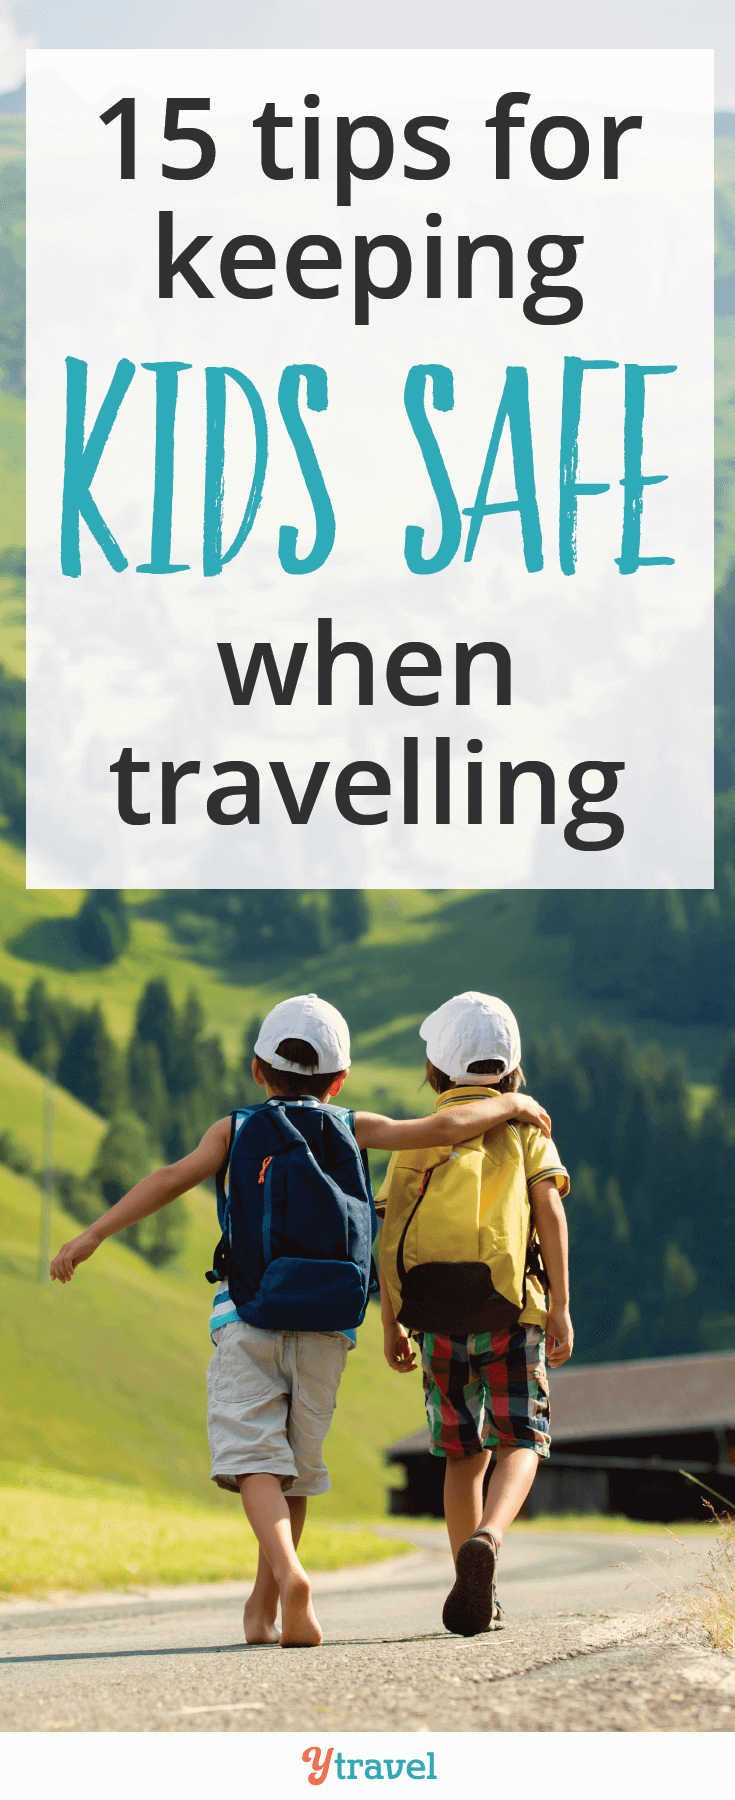 Planning a family holiday? Worried about child safety? Make sure you travel safely by following these 15 tips for keeping kids safe when travelling.